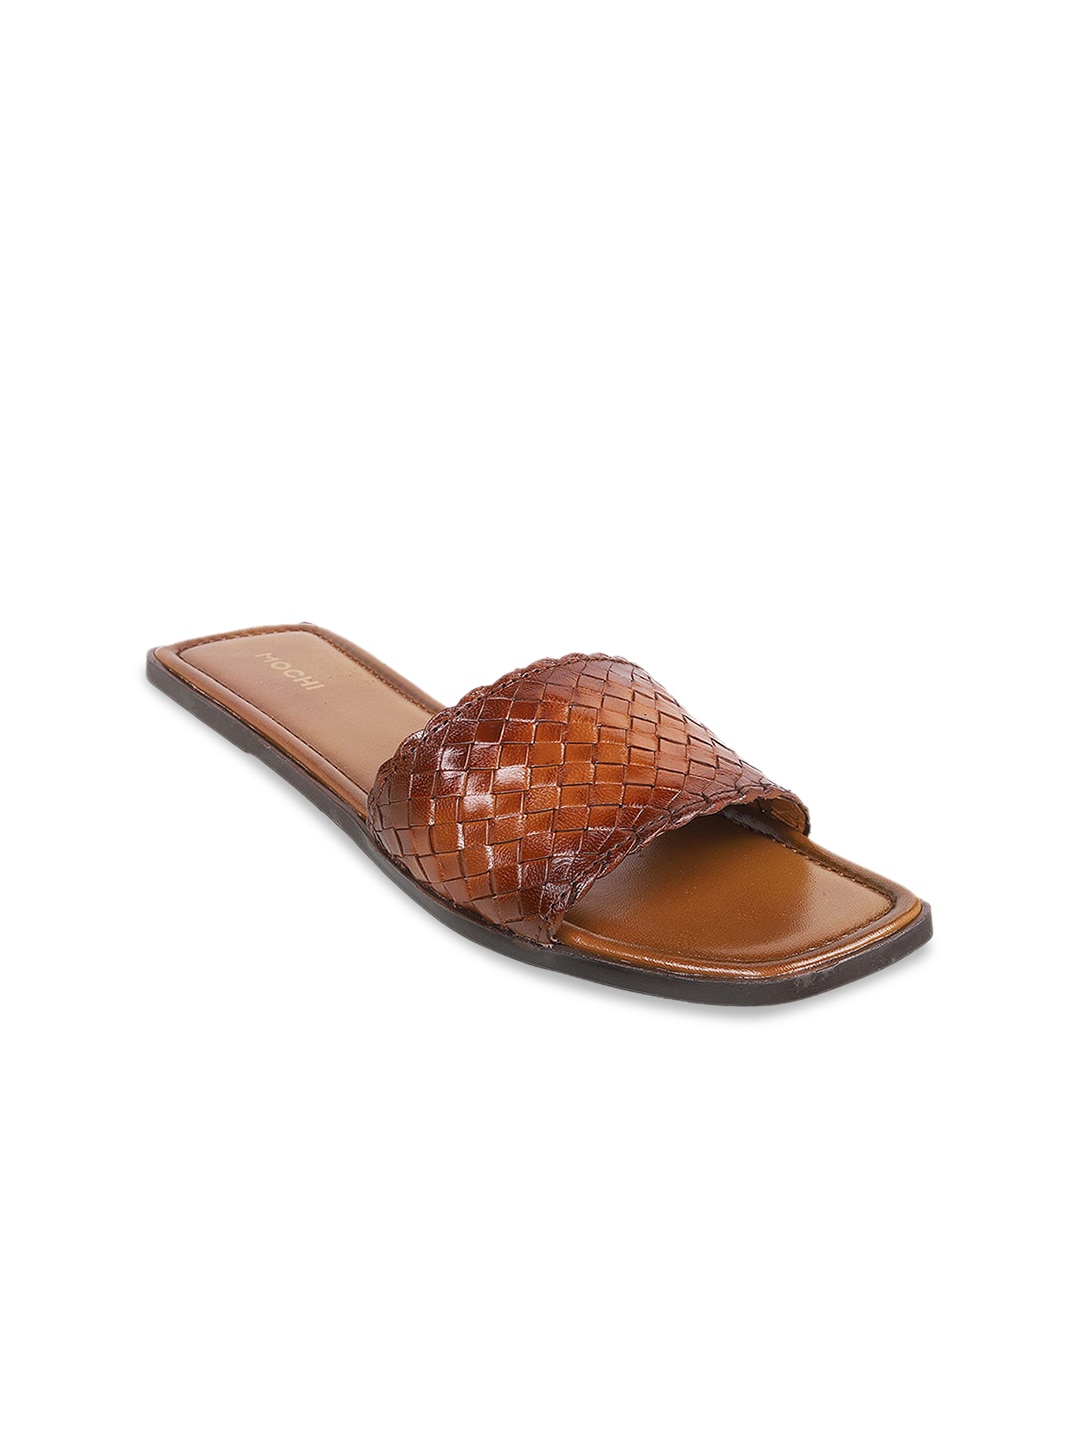 Mochi Braided Open Toe Flats Price in India